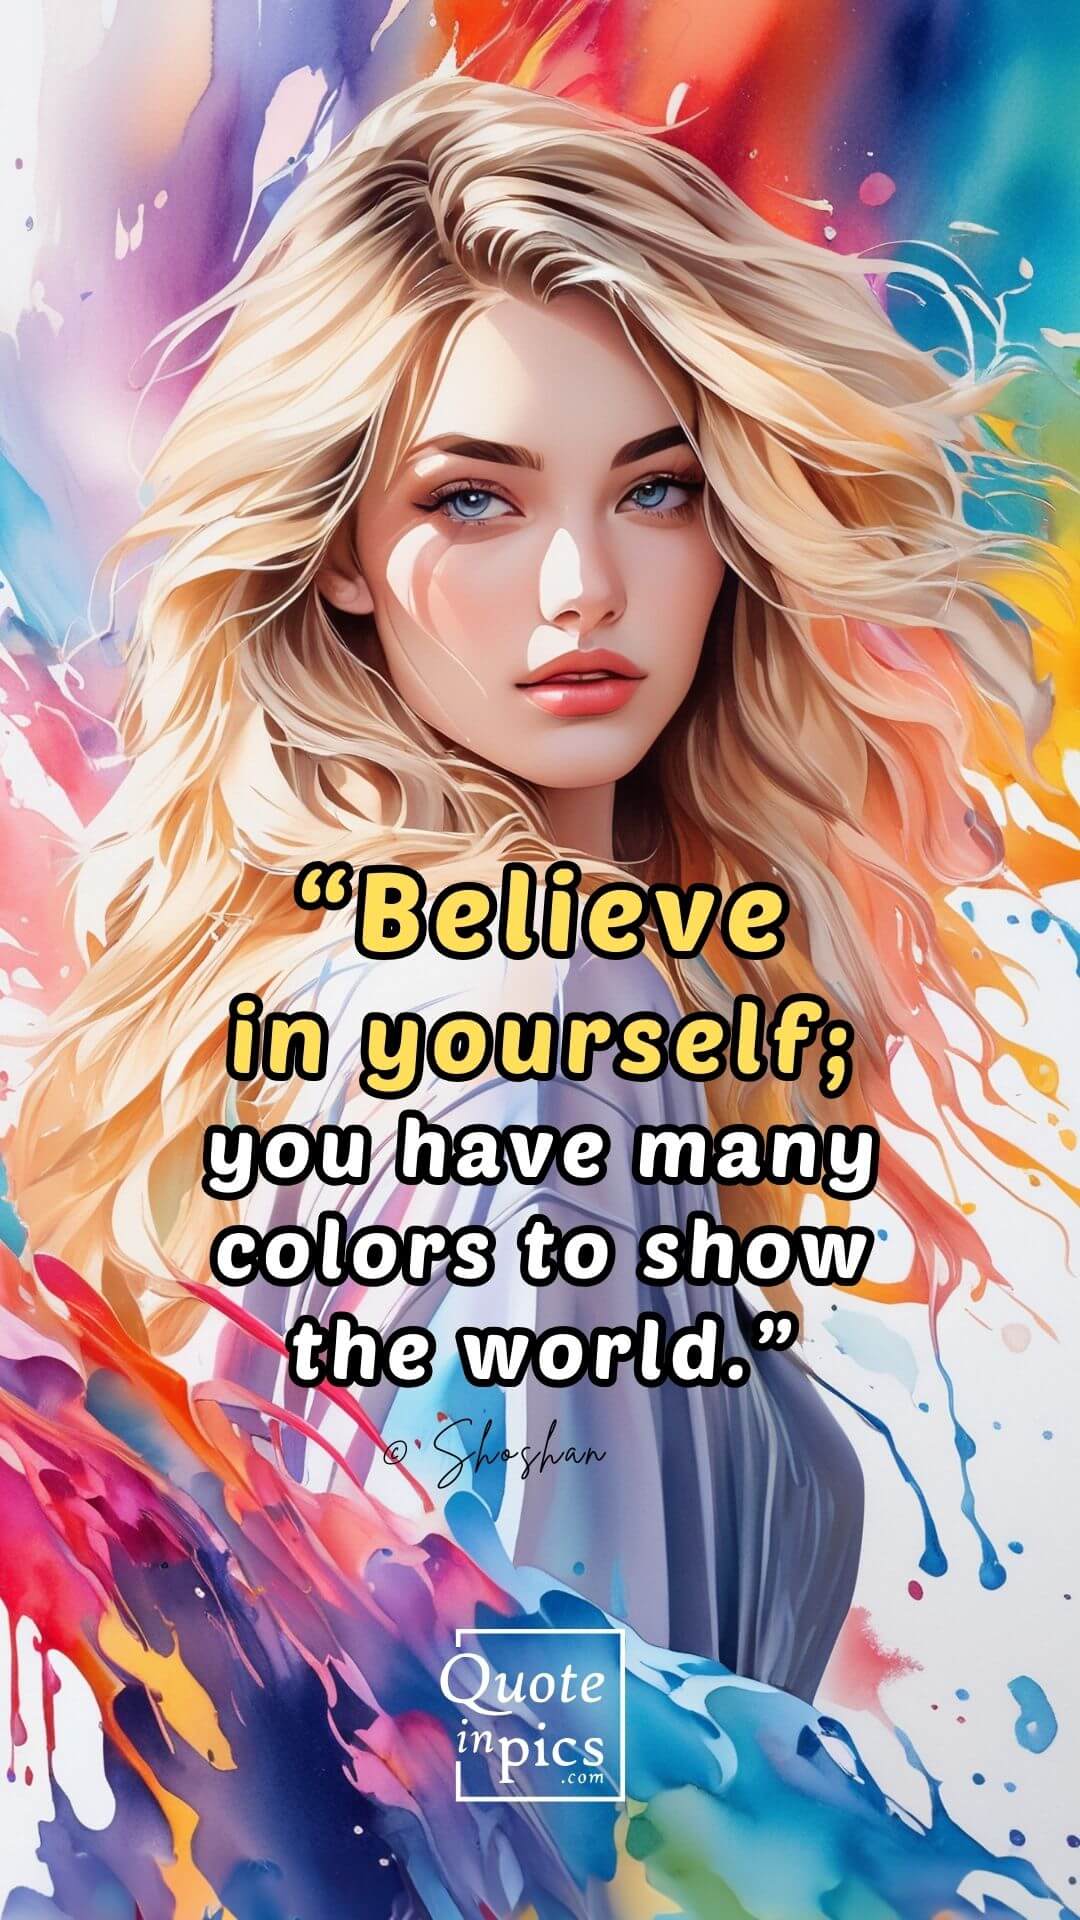 Believe in yourself; you have many colors to show the world